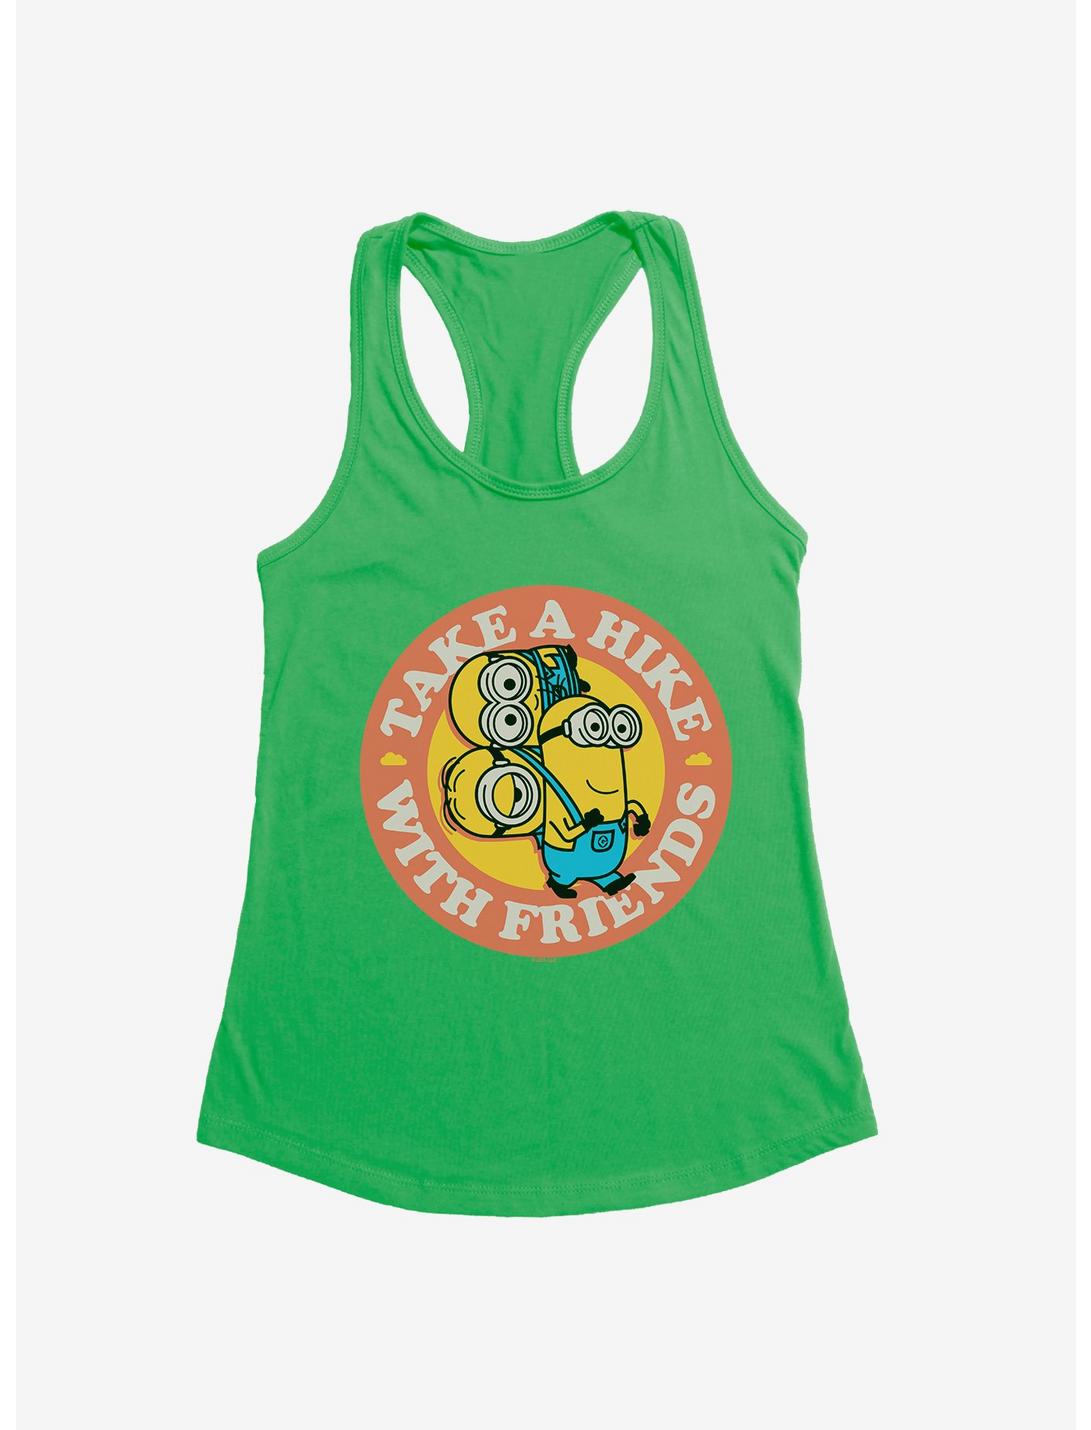 Minions Hike With Friends Womens Tank Top, KELLY GREEN, hi-res